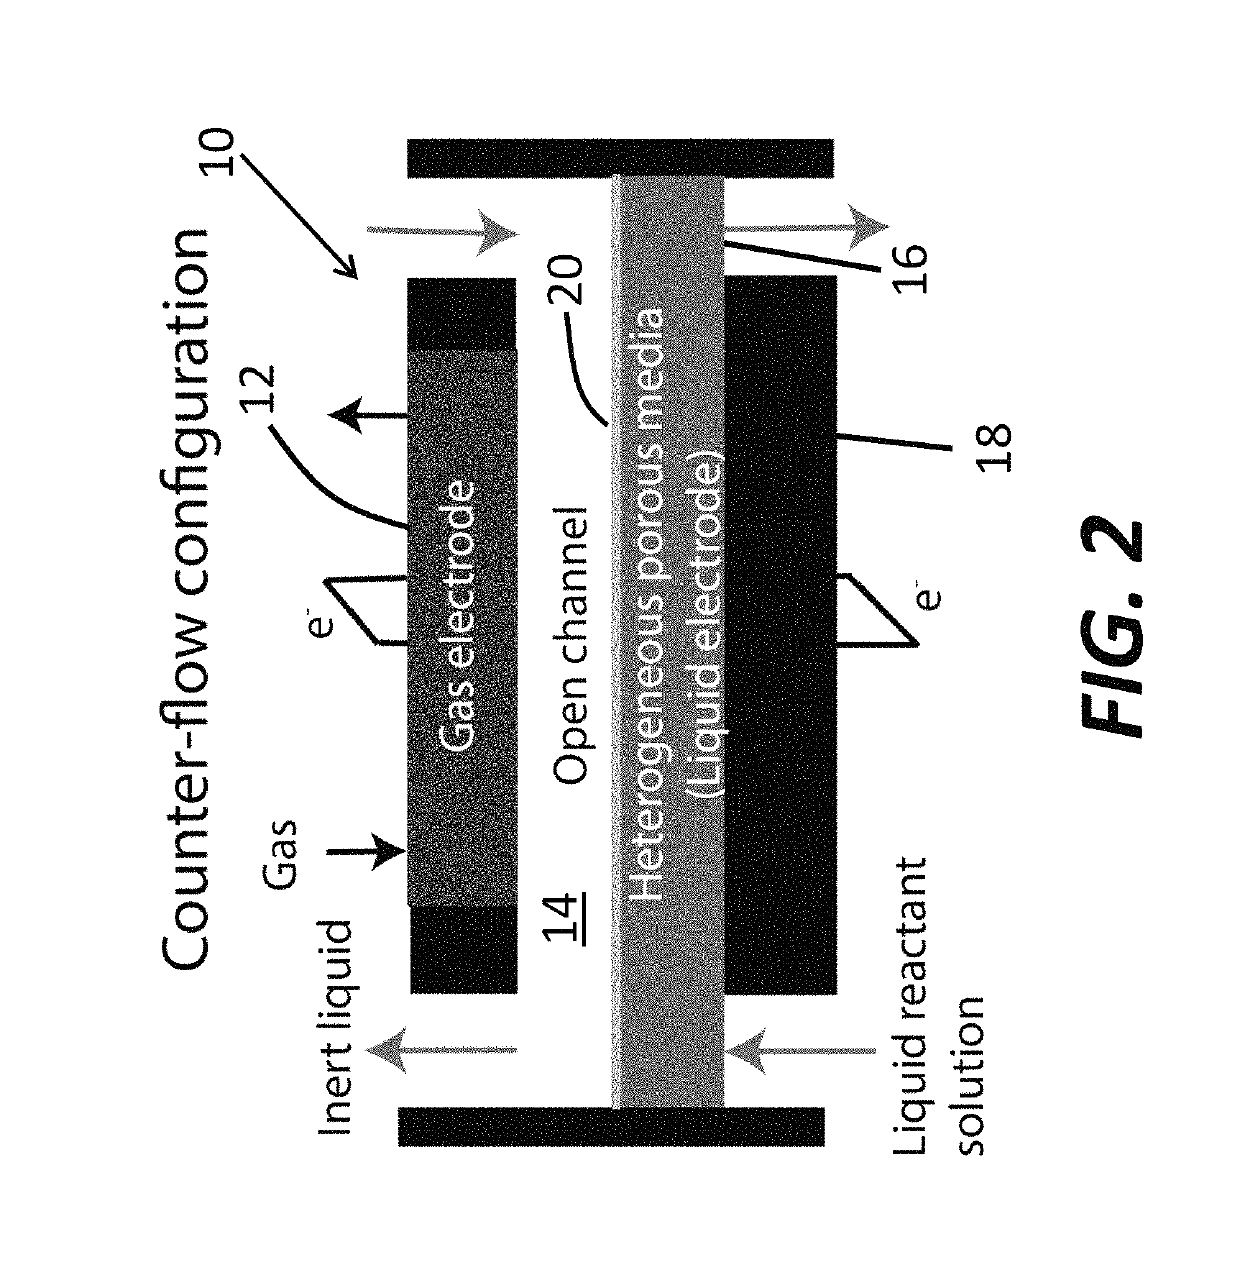 Flow battery with dispersion blocker between electrolyte channel and electrode